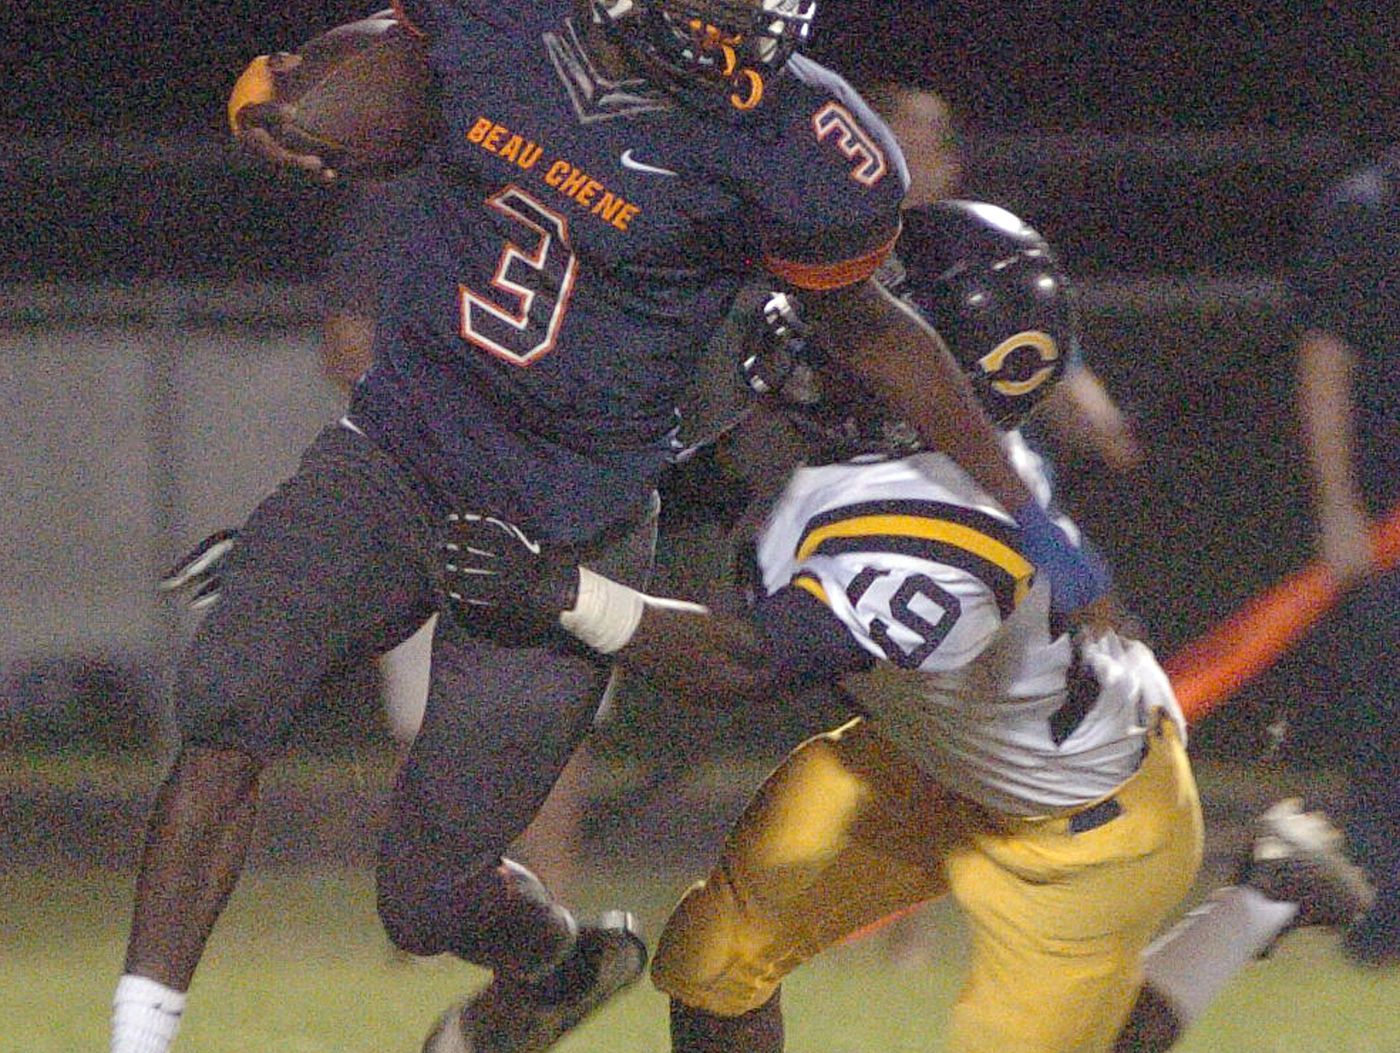 Football action Thursday between Carencro High School and Beau Chene High School.